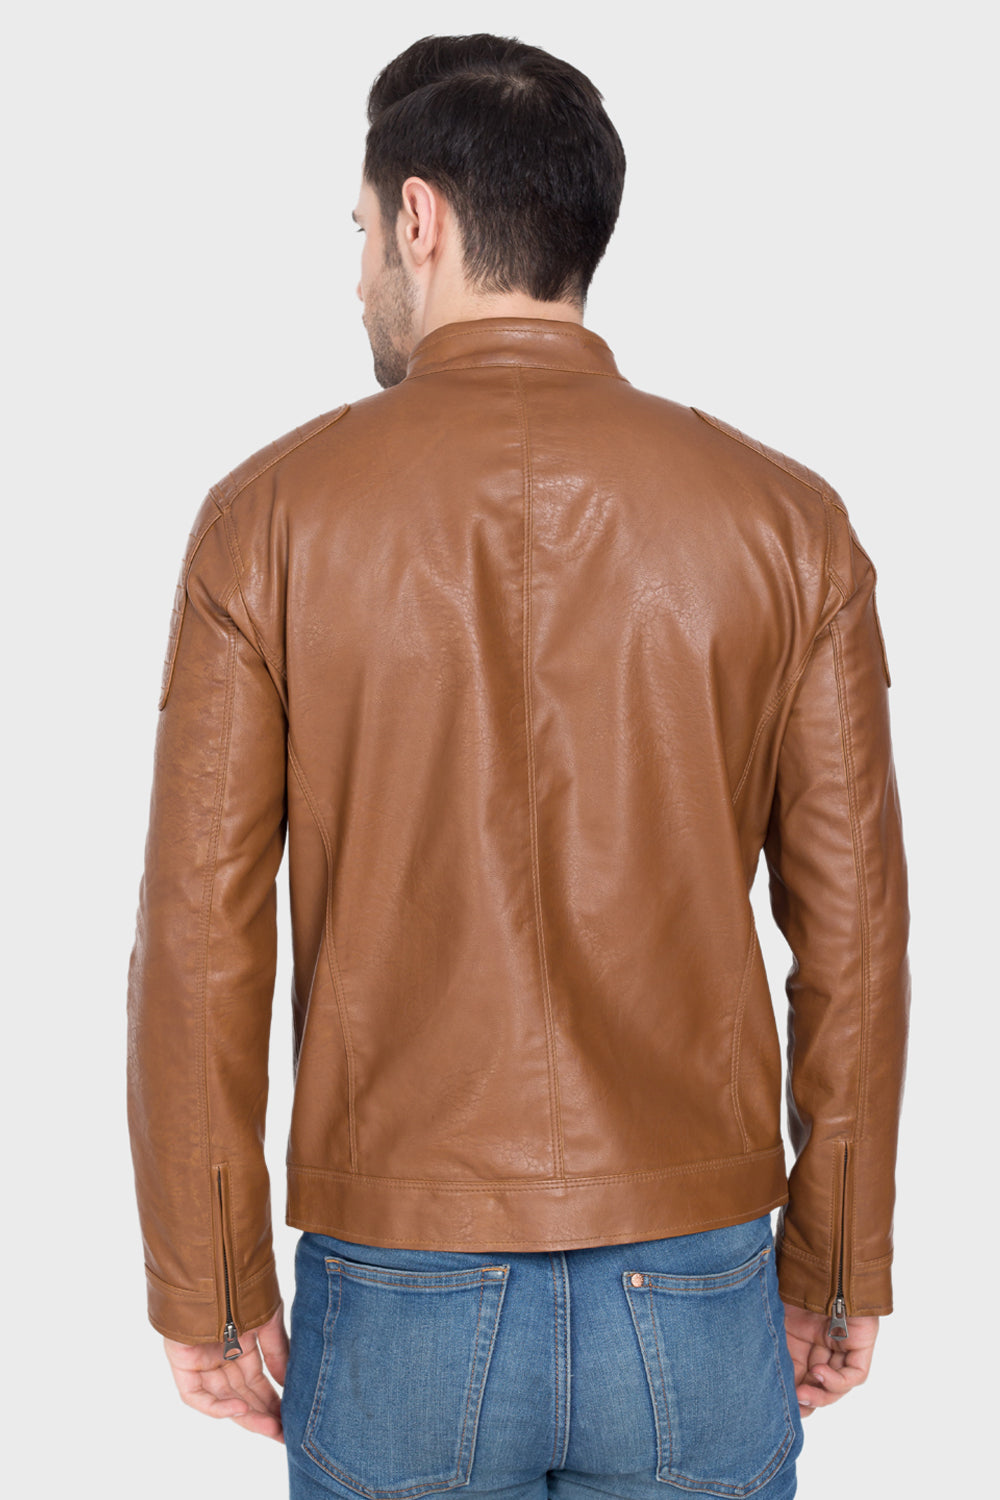 Justanned Apricot Leather Jacket